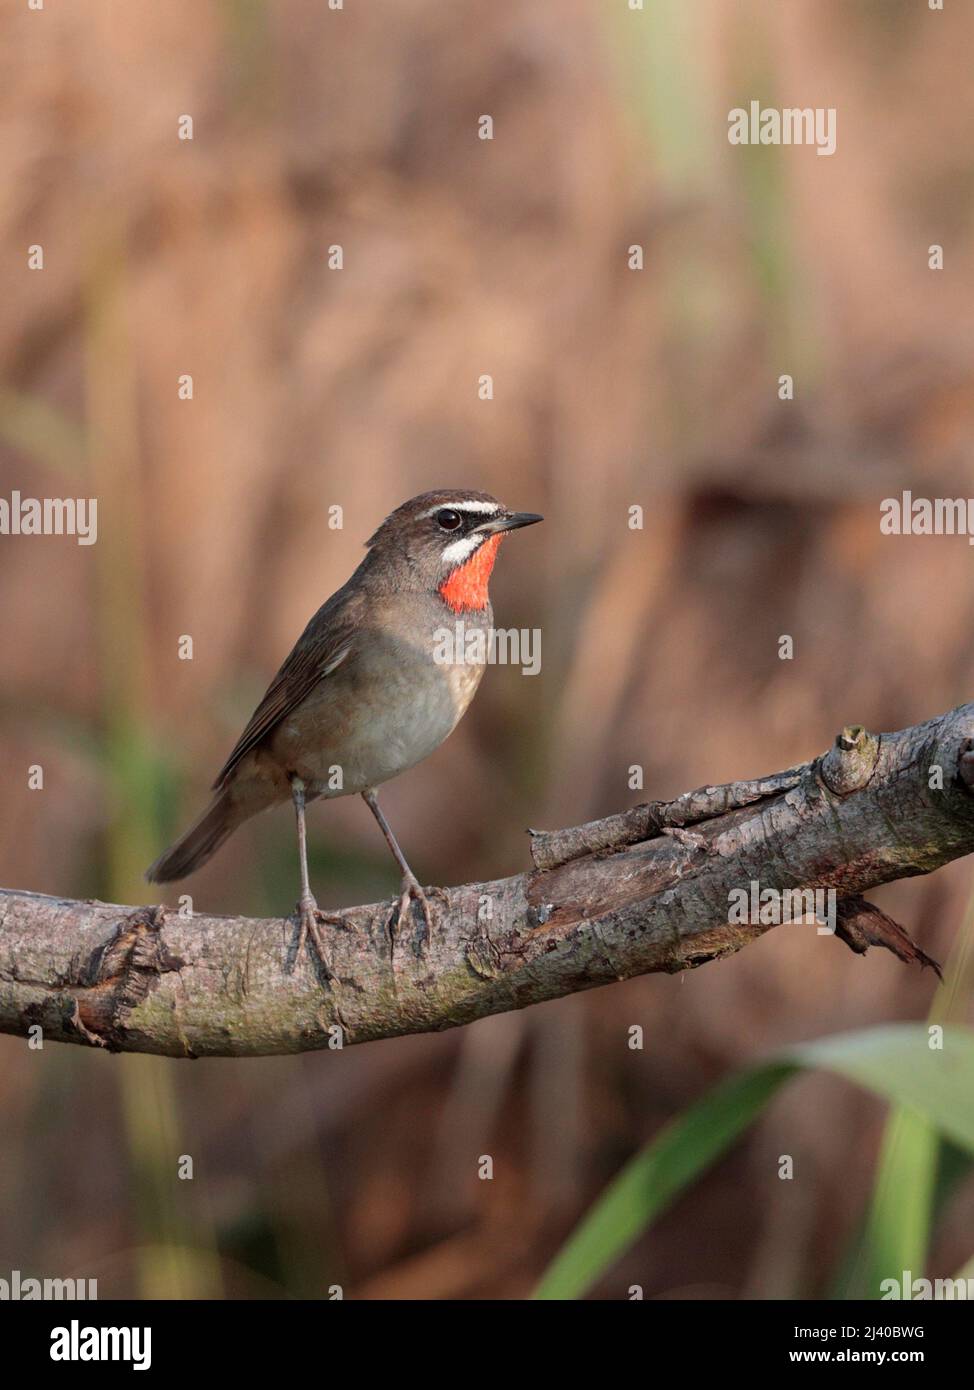 Siberian Rubythroat (Calliope calliope), eye-level view of adult perched on branch, with phragmites reedbed behind, Hong Kong 6th April 2022 Stock Photo